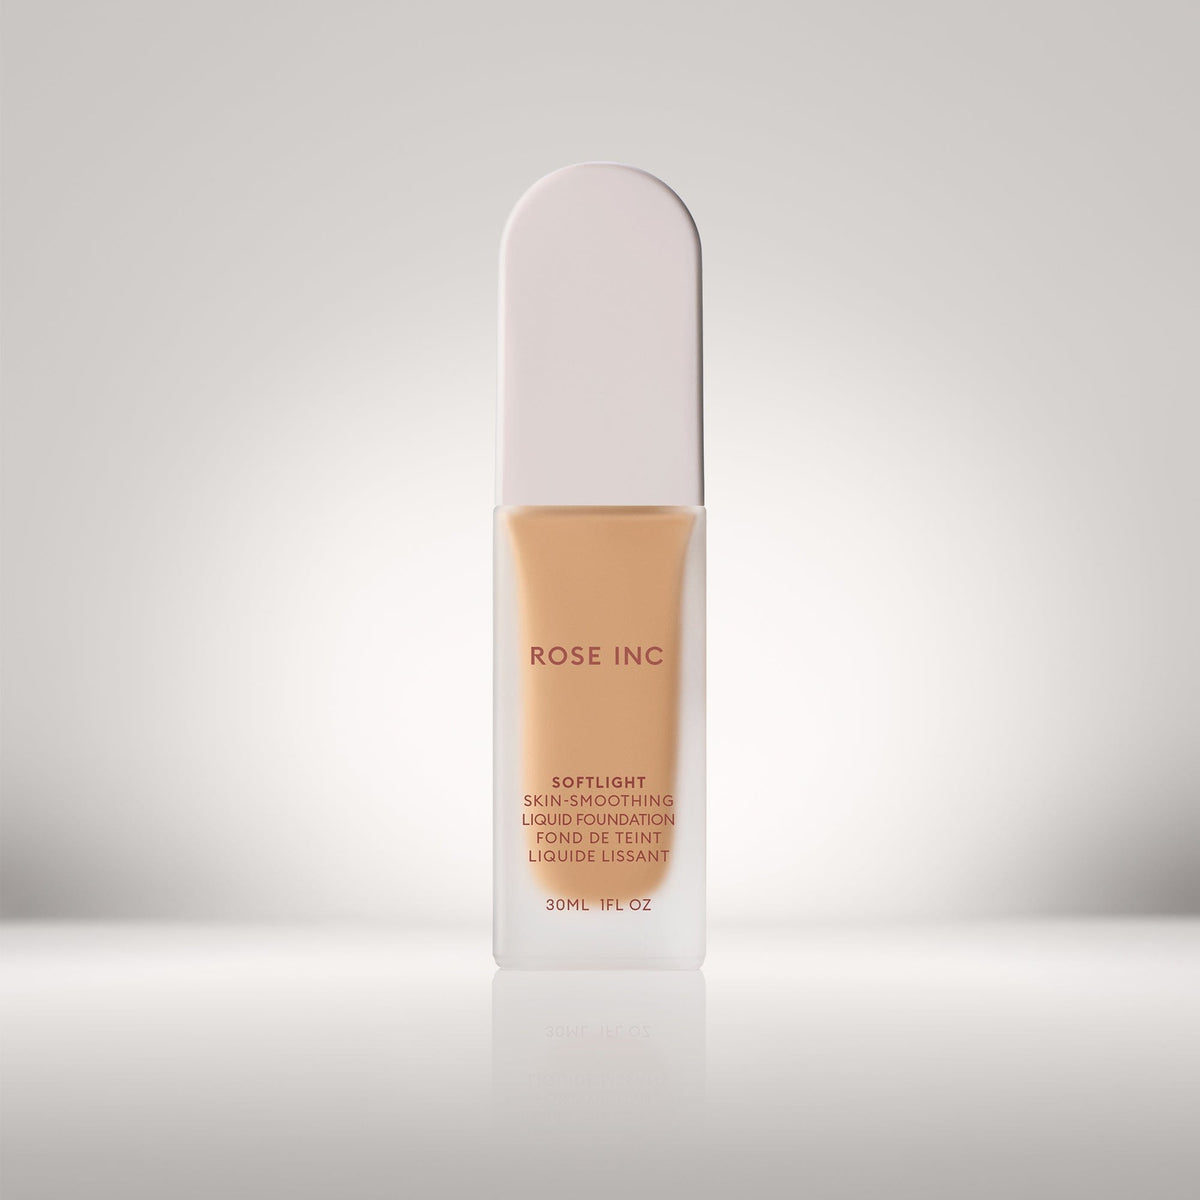 Soldier image of shade 15N in Softlight Smoothing Foundation